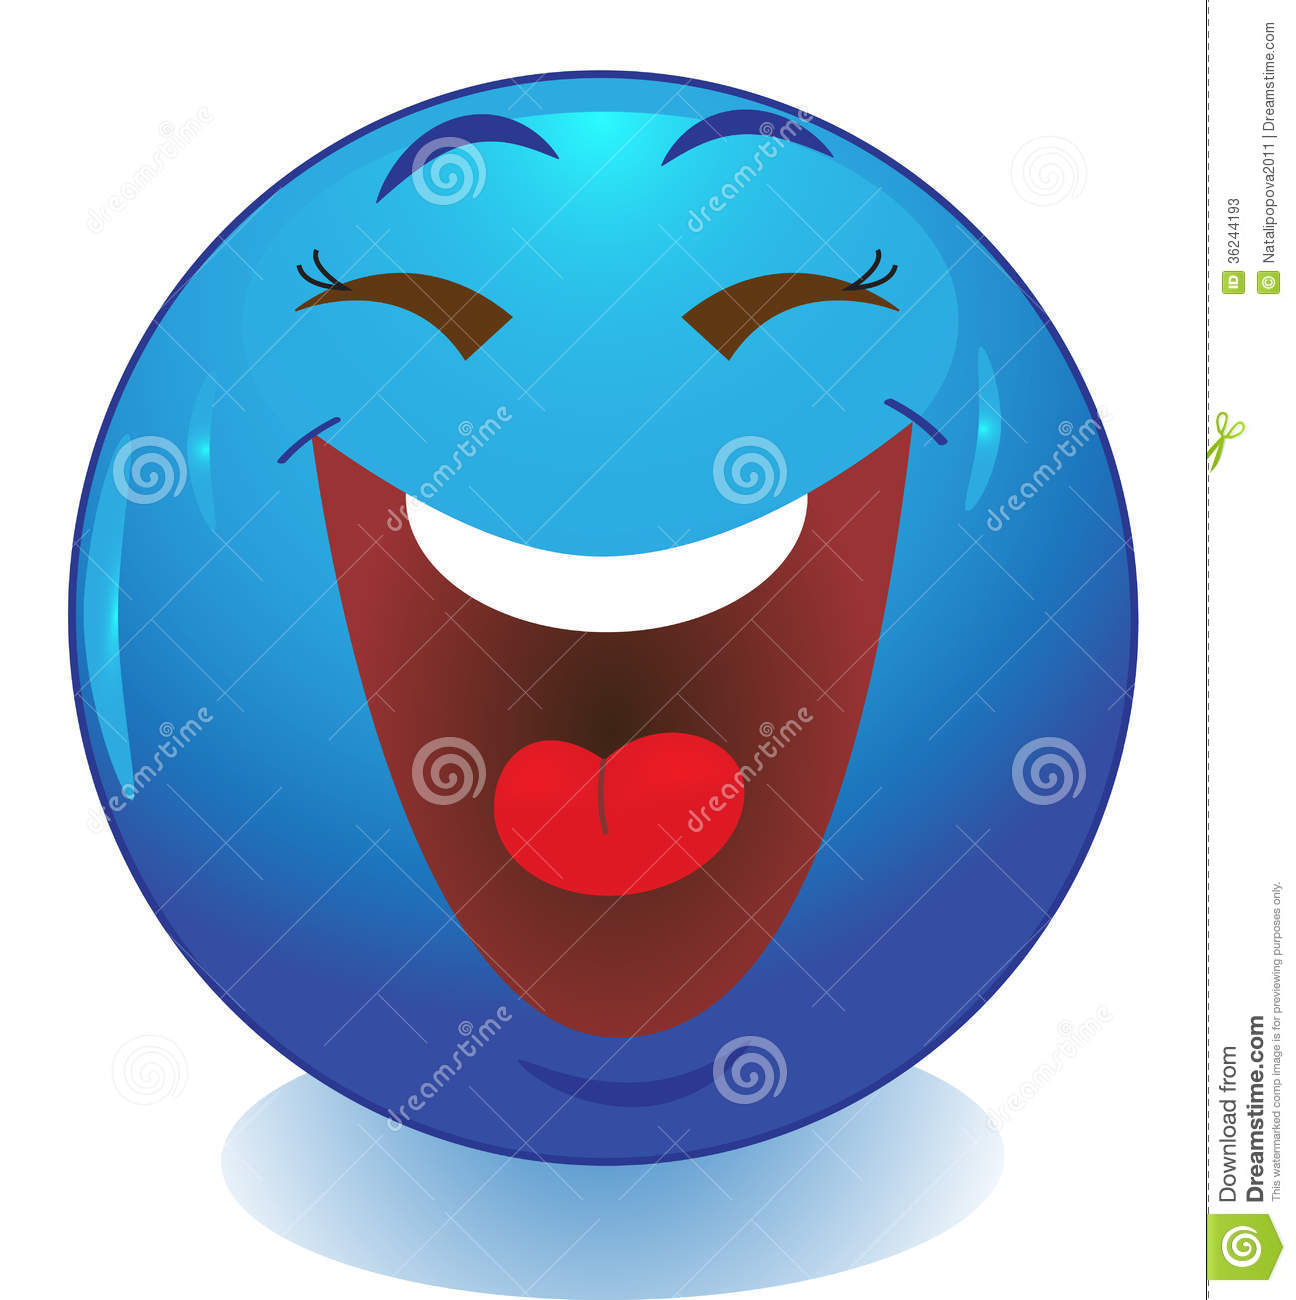 Laughing Smiley Face Clip Art Smiley Face Emoticon Stock Image